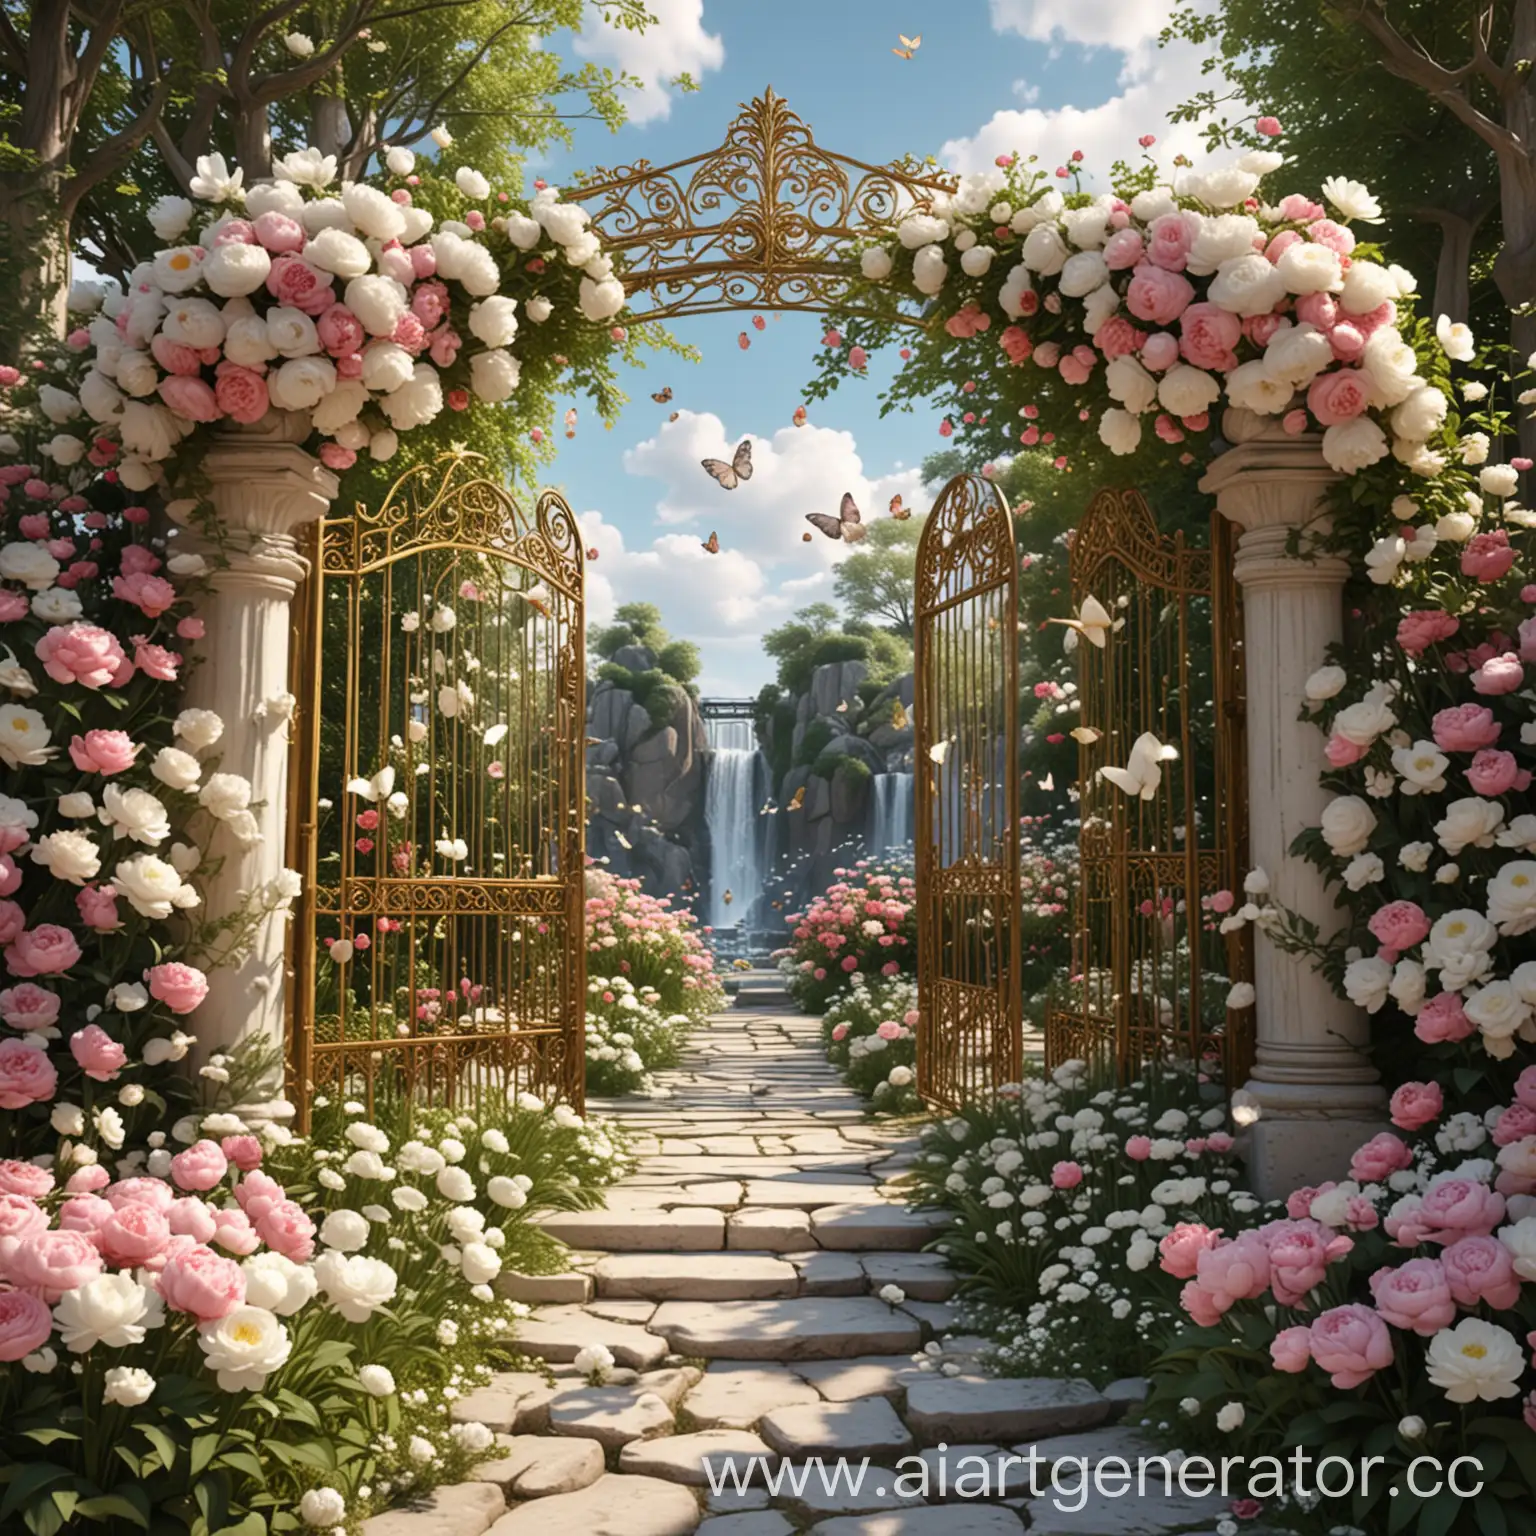 Luxury-Heaven-Garden-with-Golden-Gates-White-Butterflies-and-Blooming-Peonies